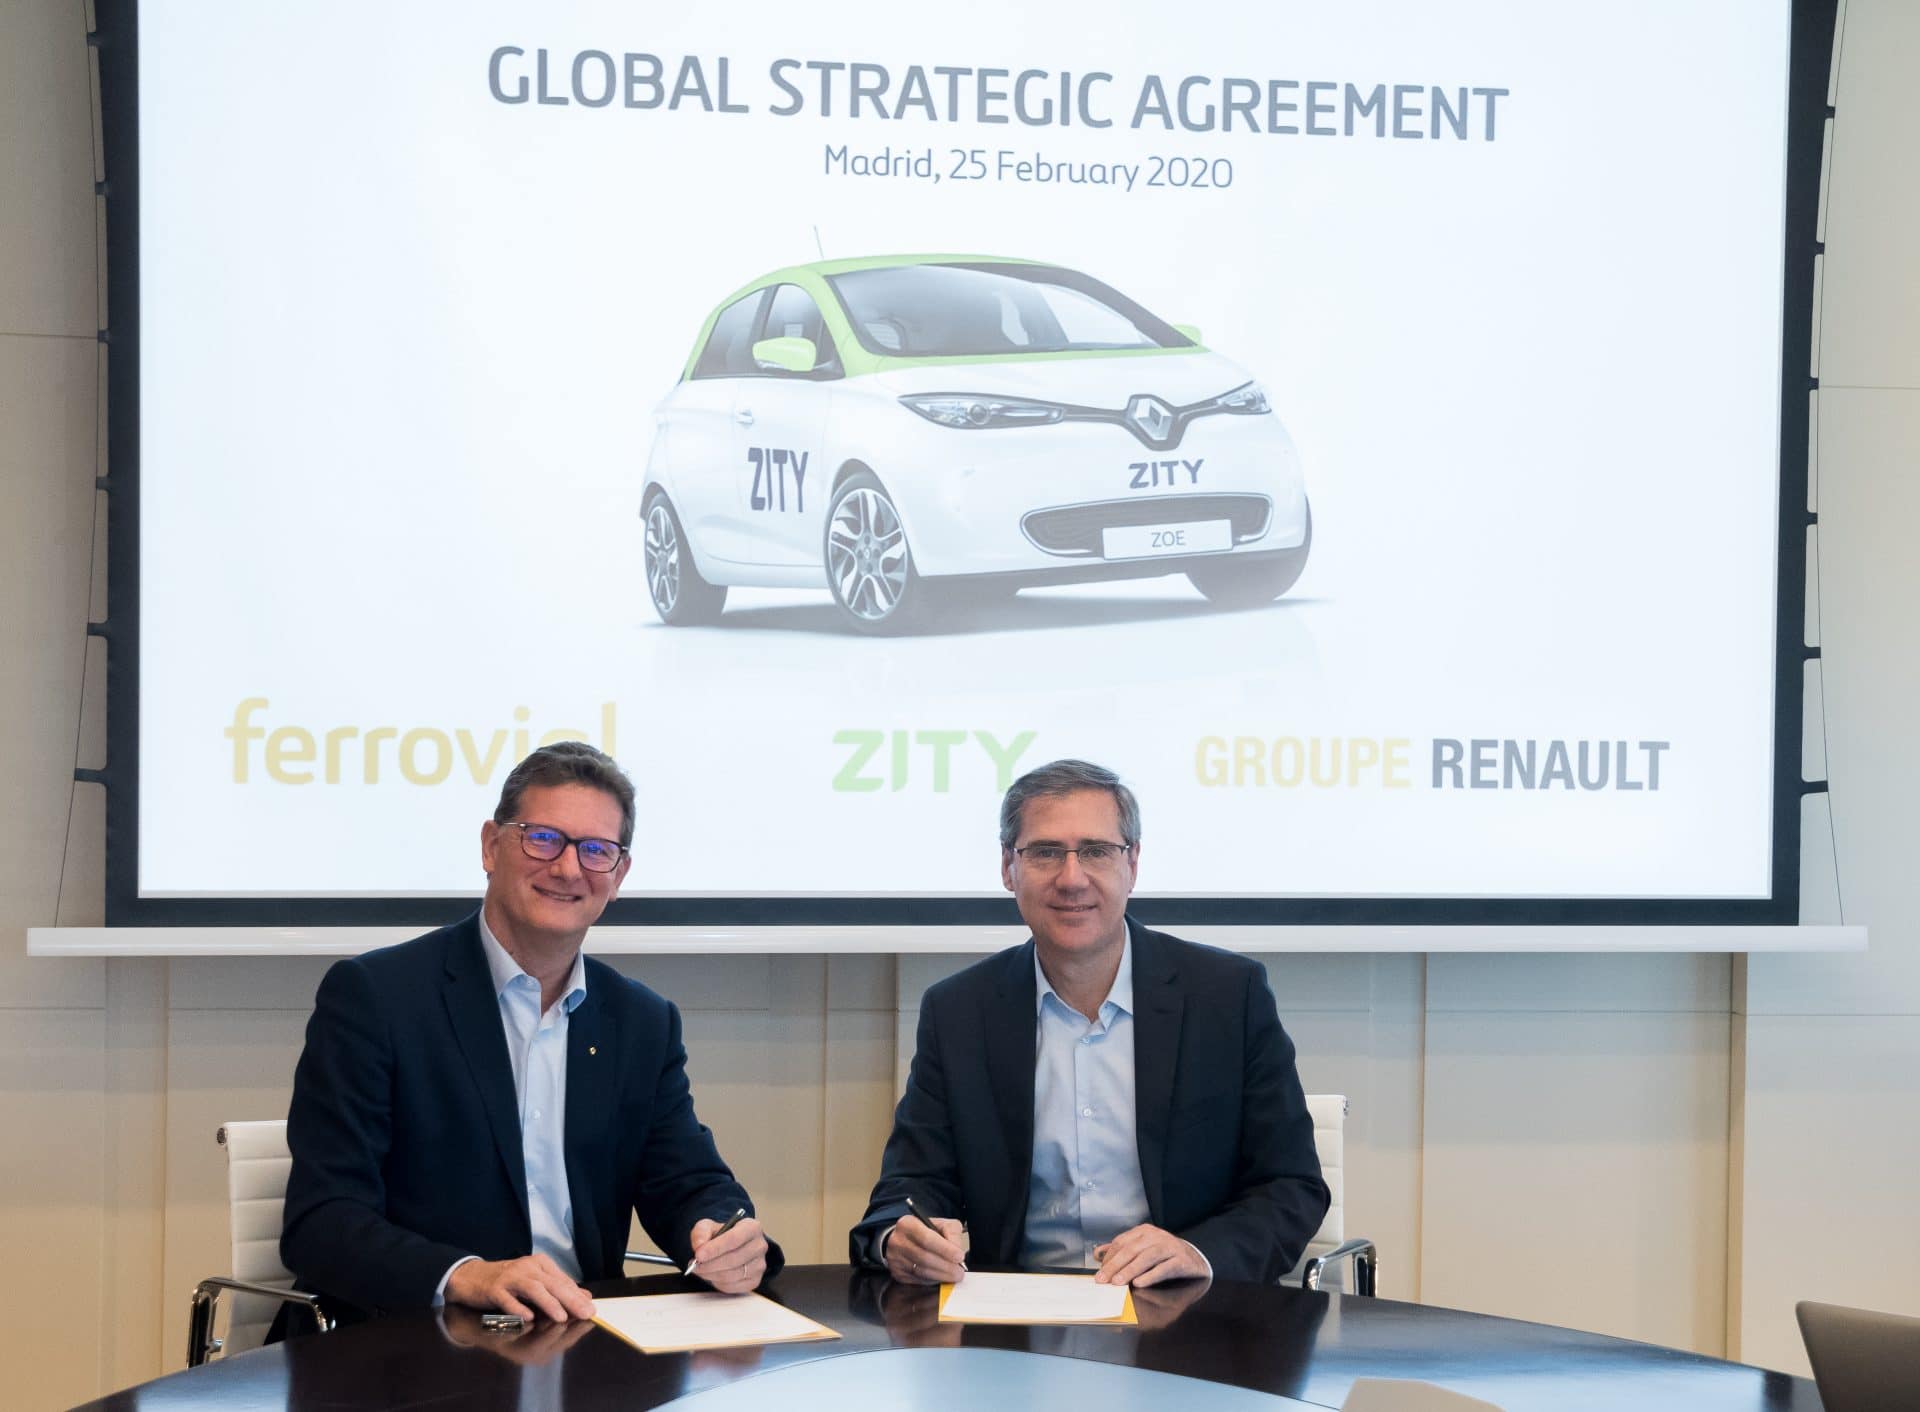 Strategic agreement of Ferrovial and Renault to expand Zity to Paris